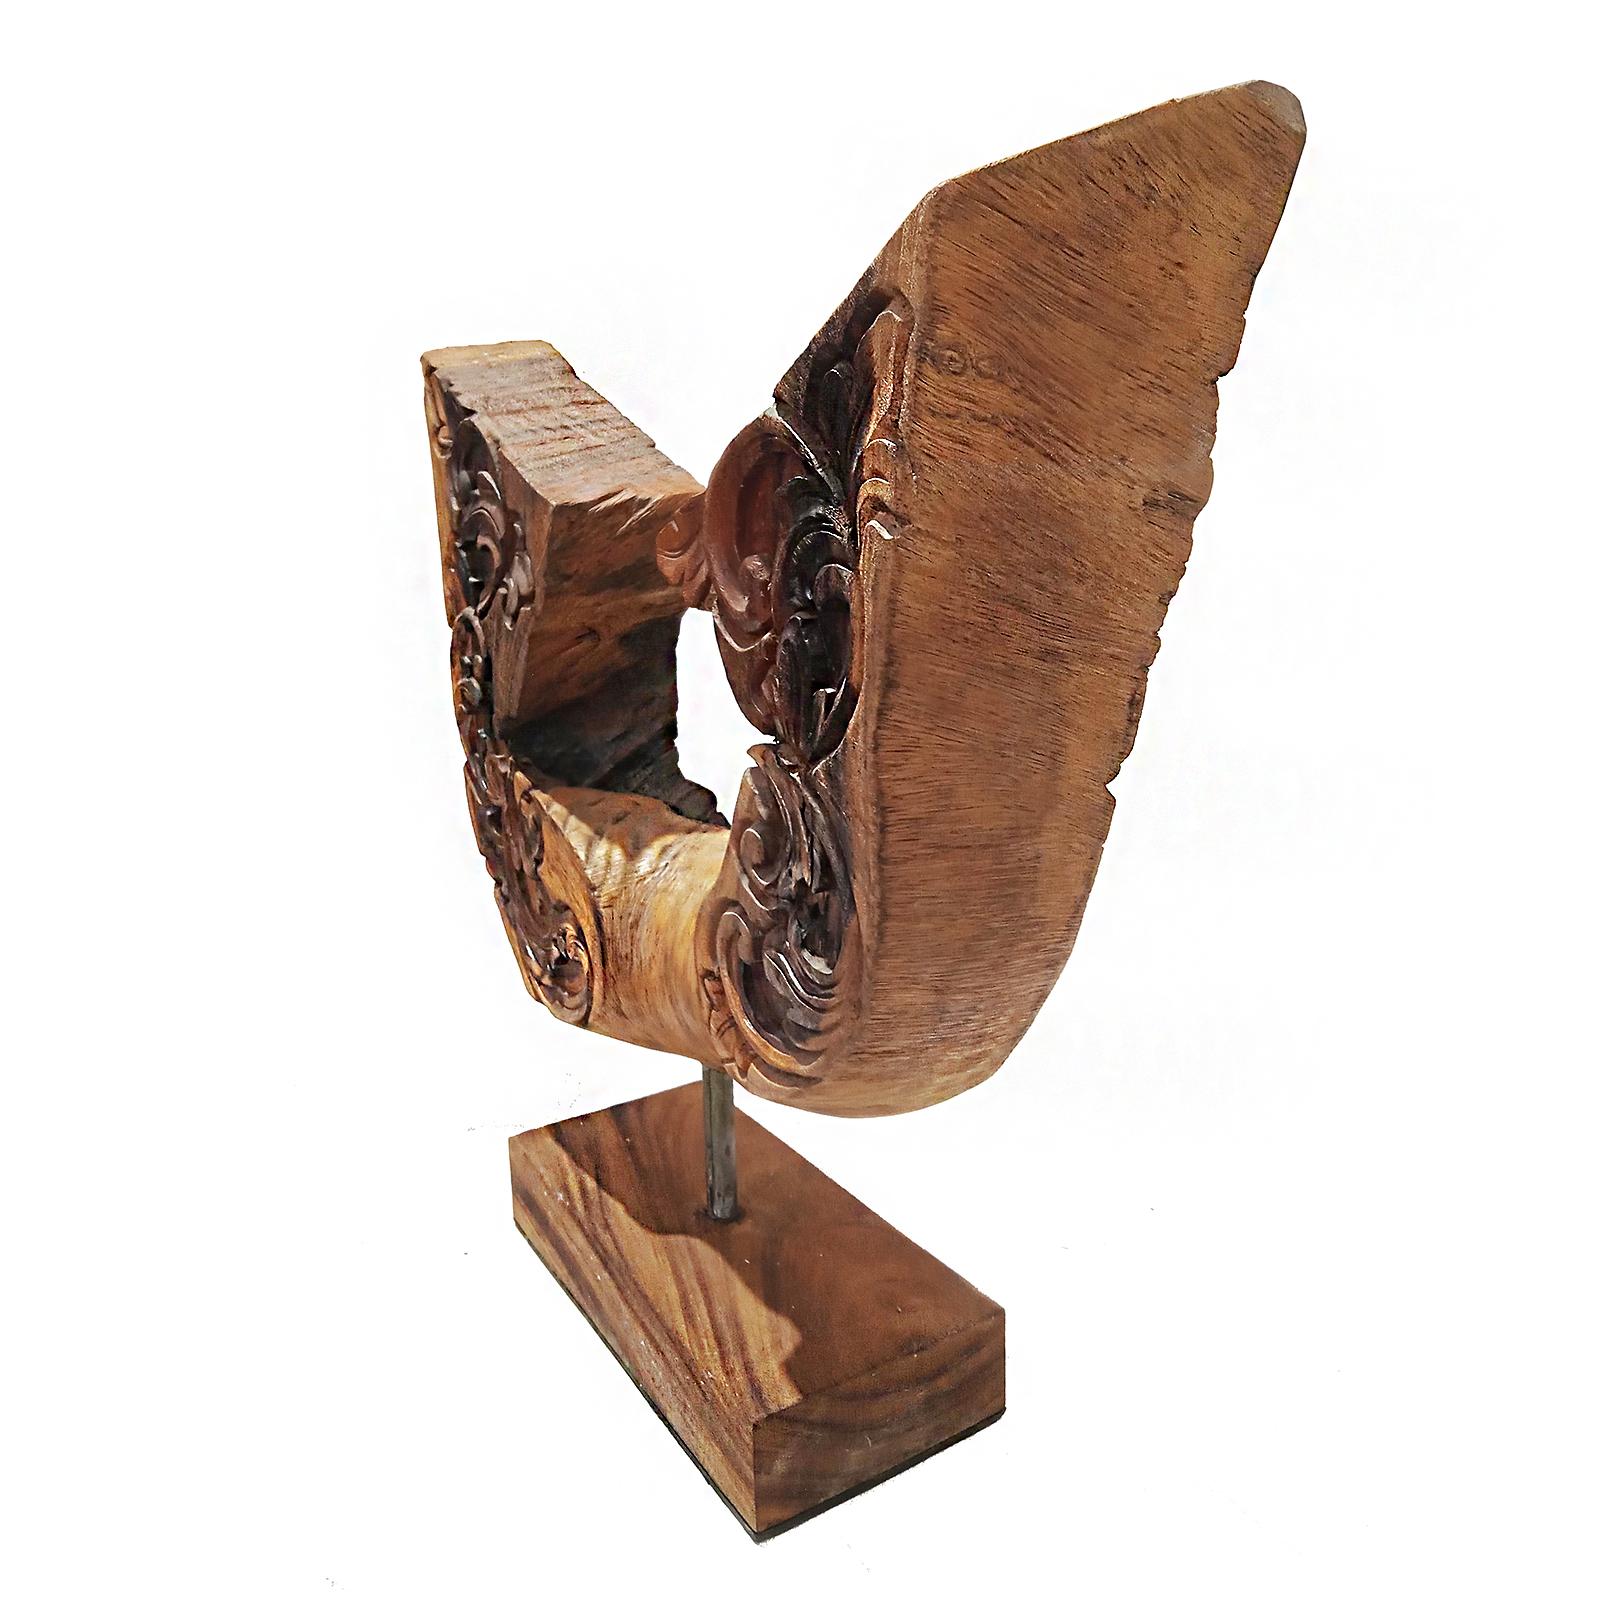 Indonesian Reclaimed Wood Sculpture, Wing-Shaped For Sale 6